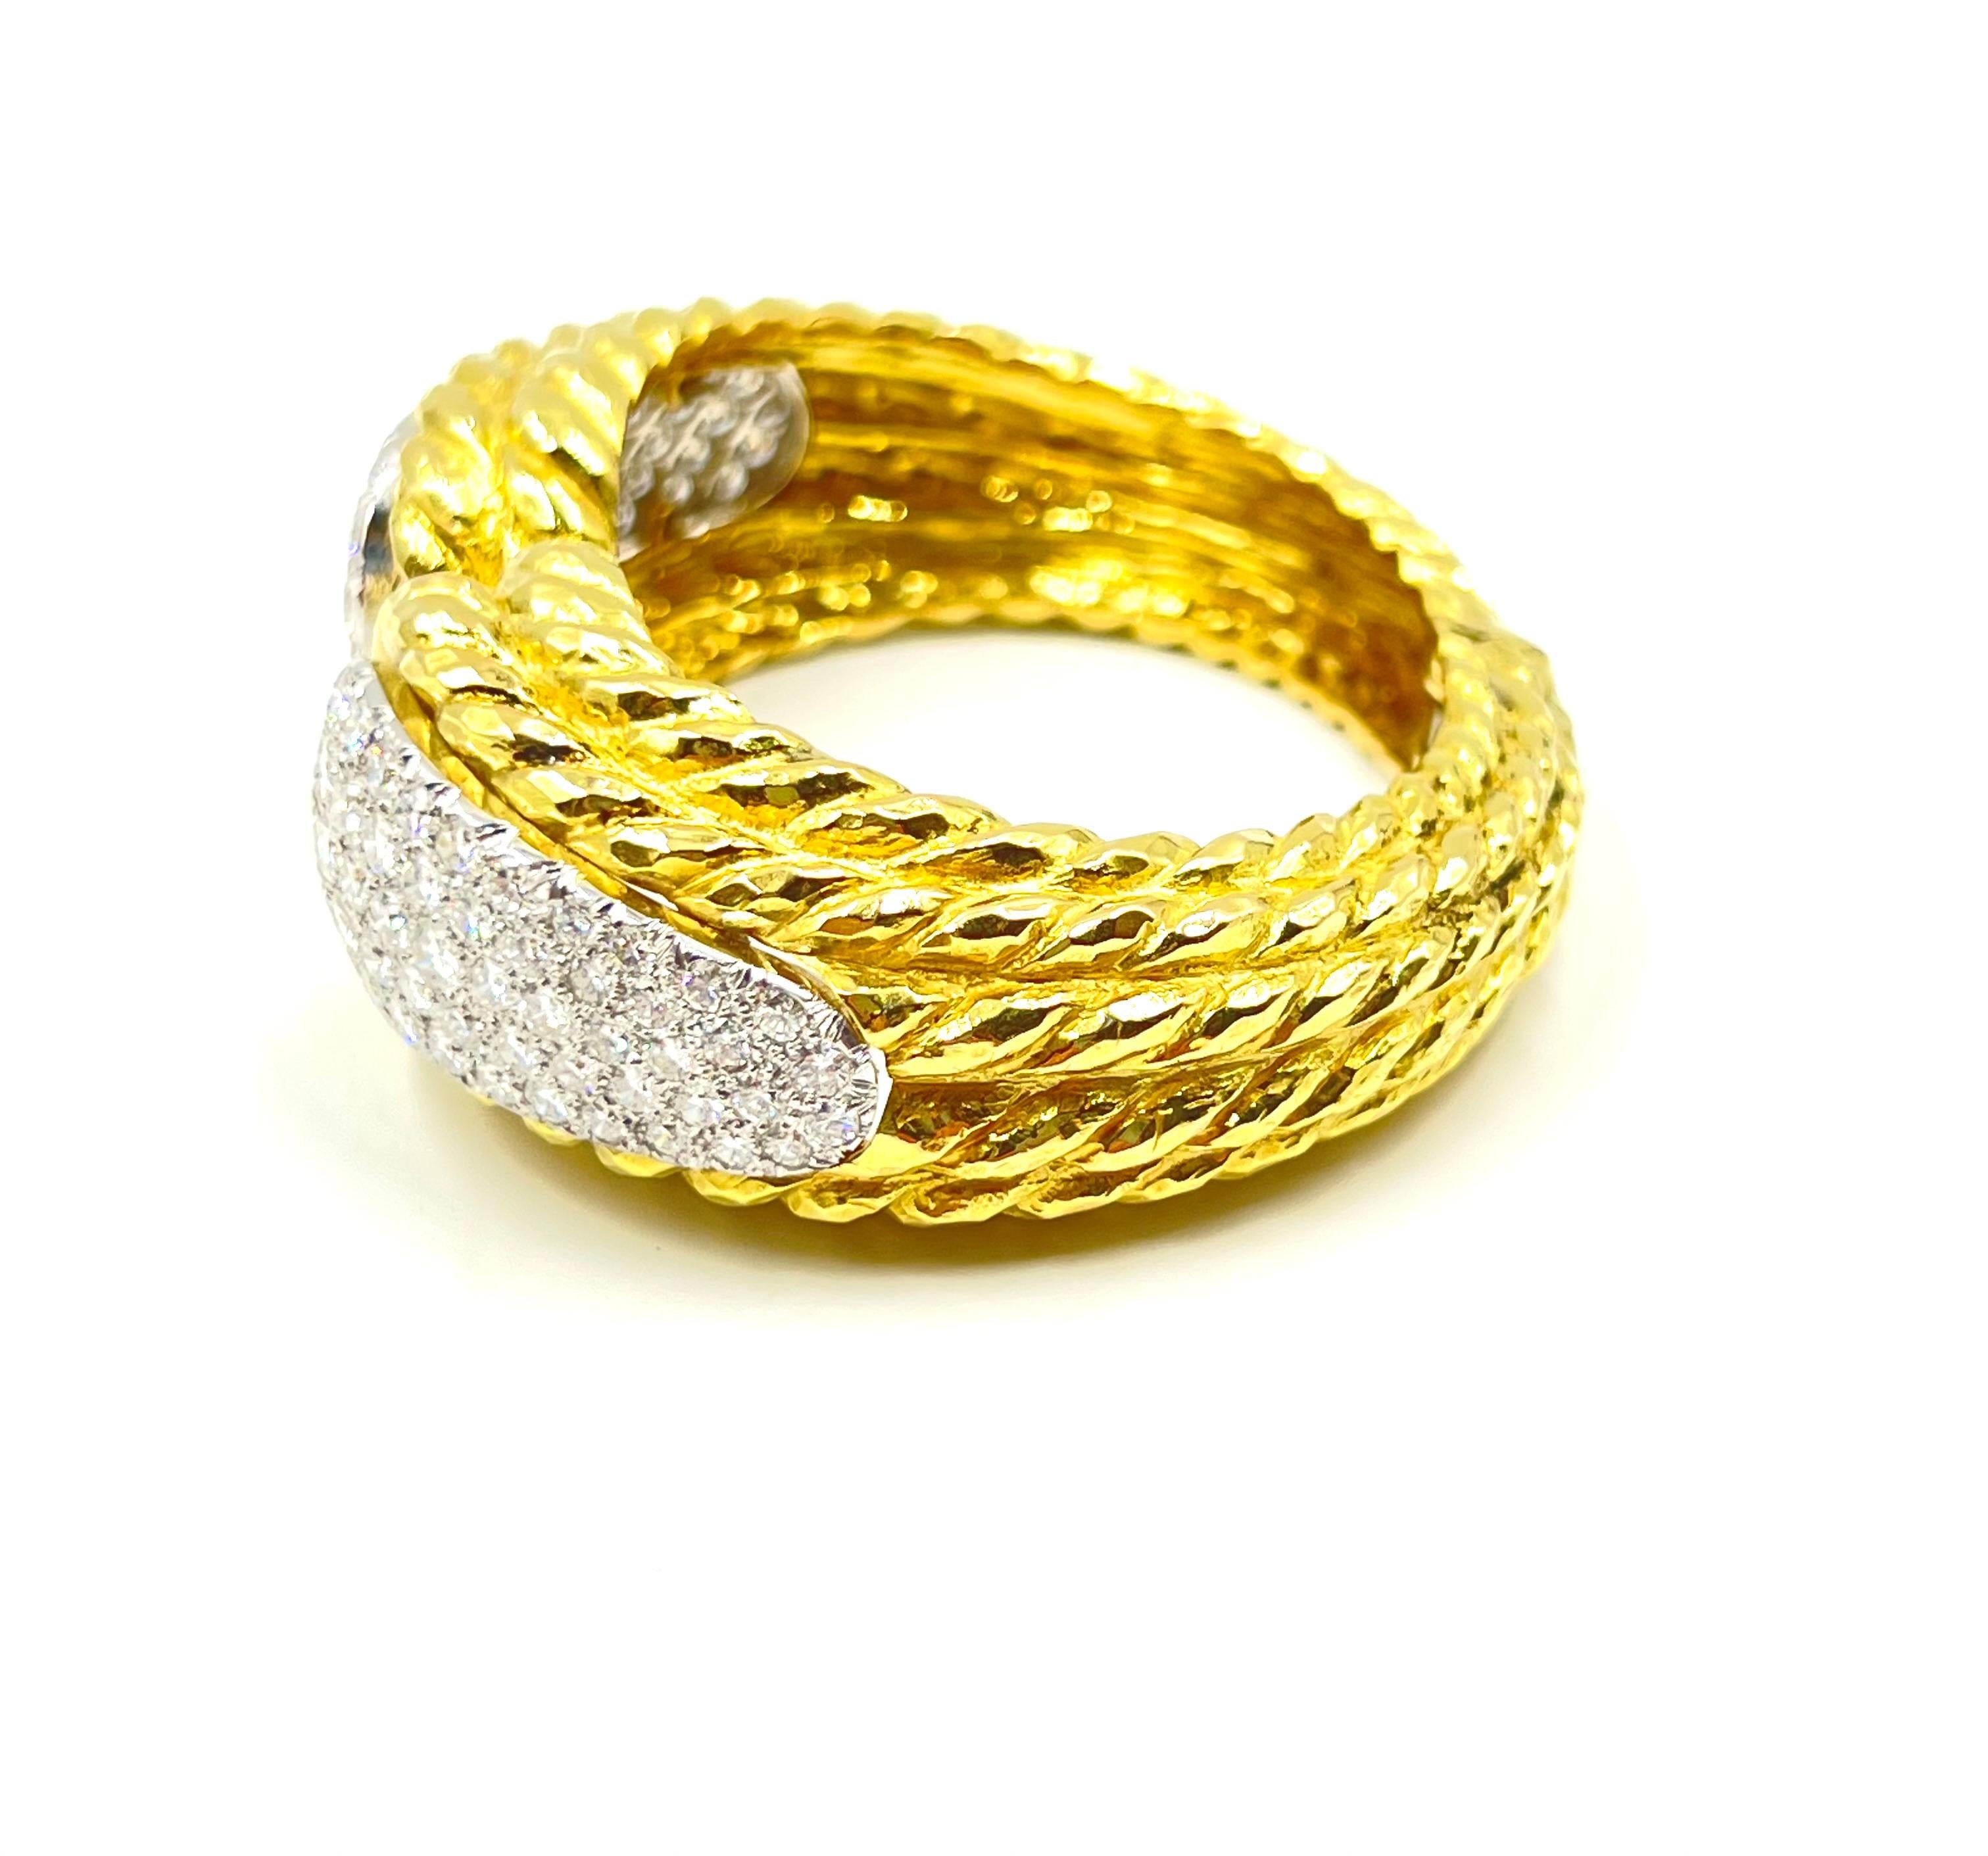 David Webb hinged cuff bracelet, featuring a pavé-set round brilliant-cut diamond section at either end, the diamonds set in platinum and bangle in 18k yellow gold with ribbed sides. Stamped 